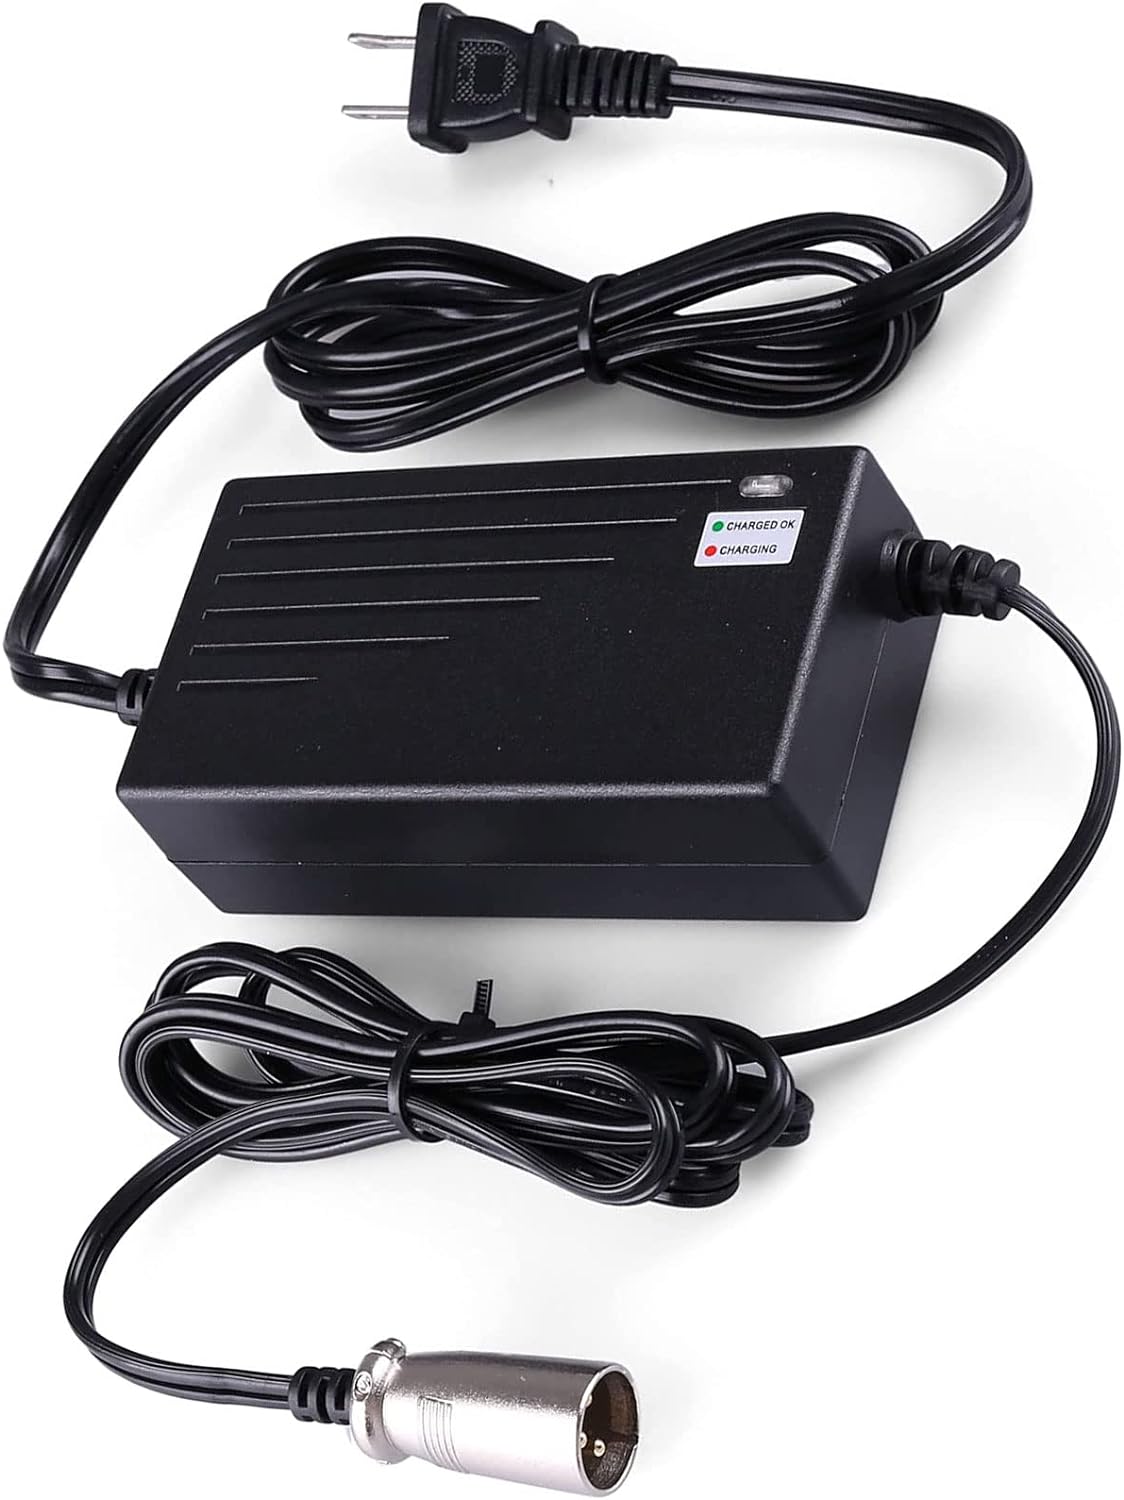 24V 2A Battery Charger for GoGo Mobility Scooter - Premium 24V 2000mA Quick Charger (3-Pin XLR Conne